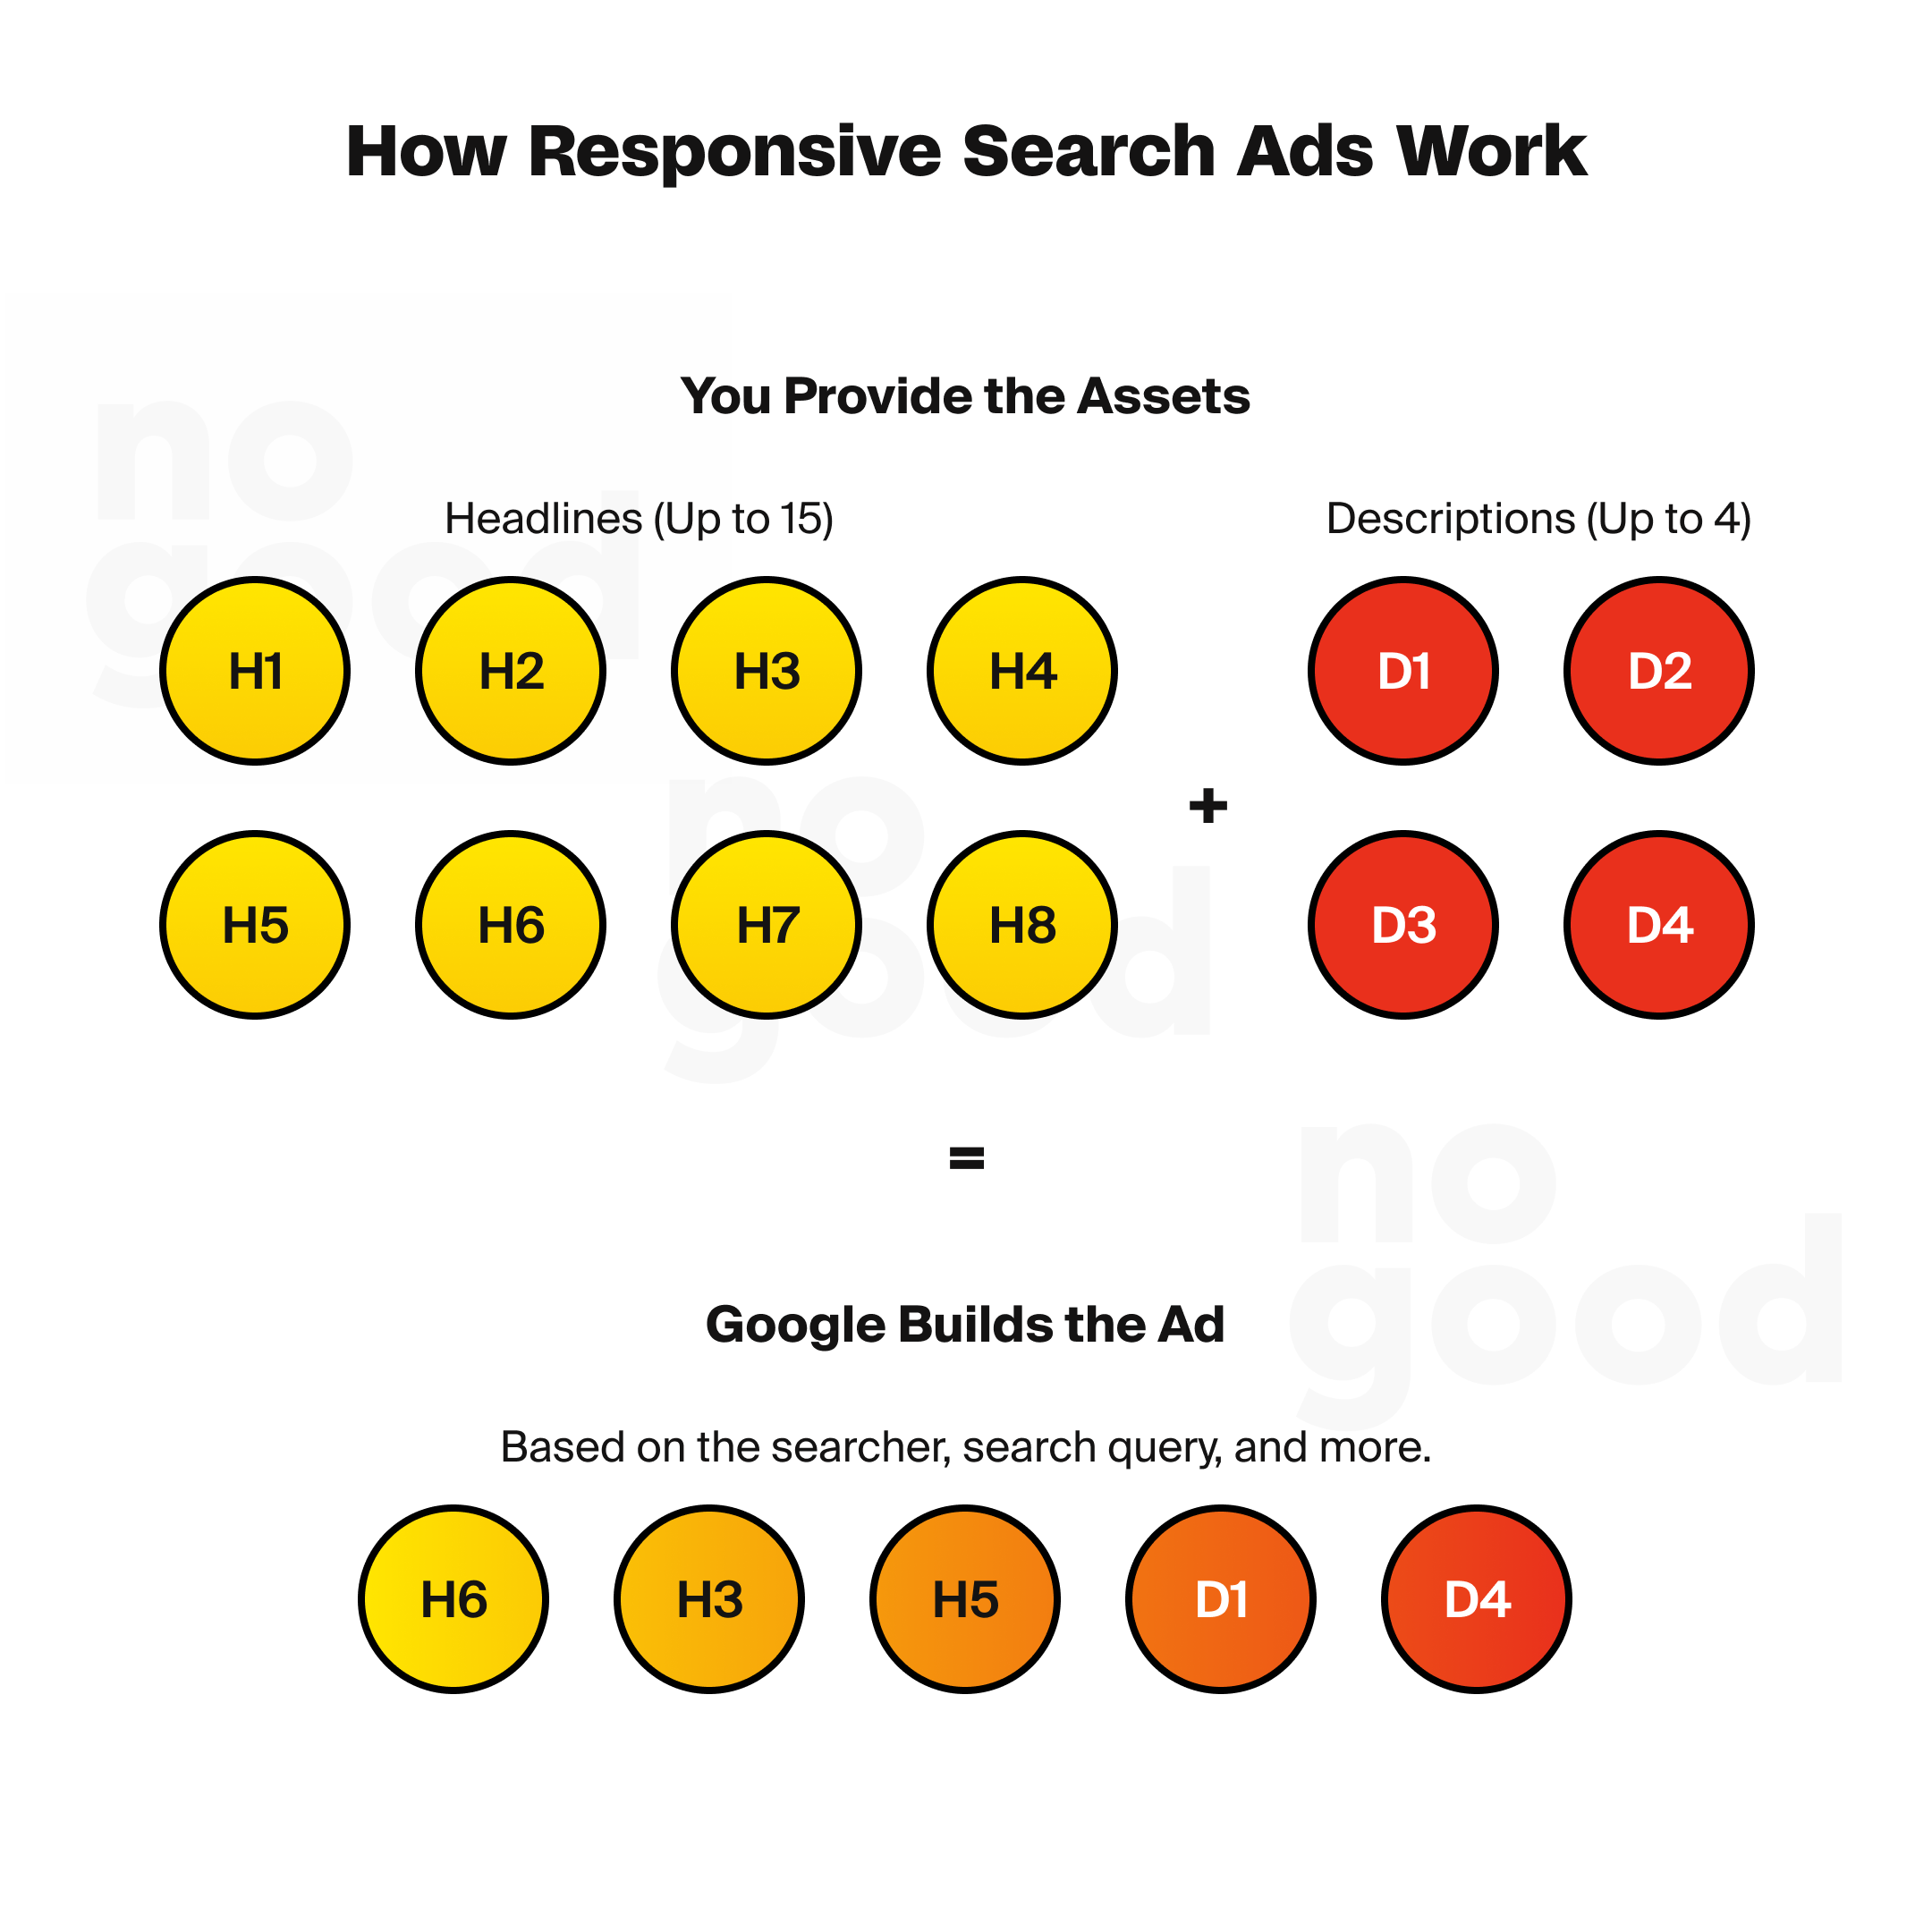 How responsive search ads work